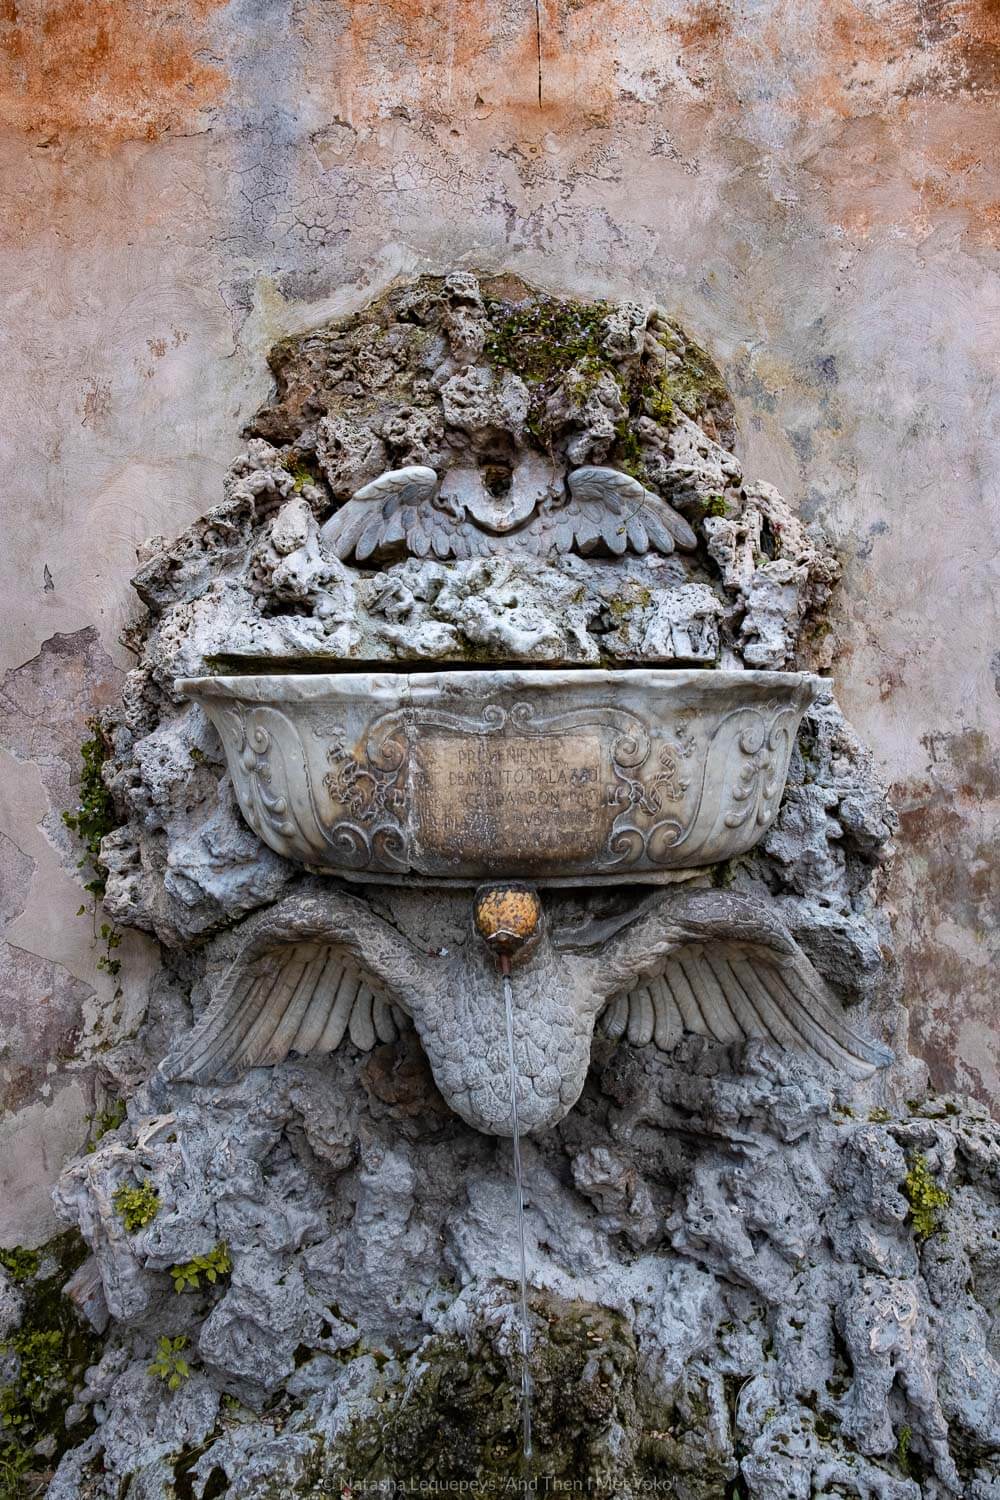 Water fountain in the Orange Garden in Rome, Italy. Travel photography and guide by © Natasha Lequepeys for "And Then I Met Yoko". #rome #italy #travelblog #travelphotography